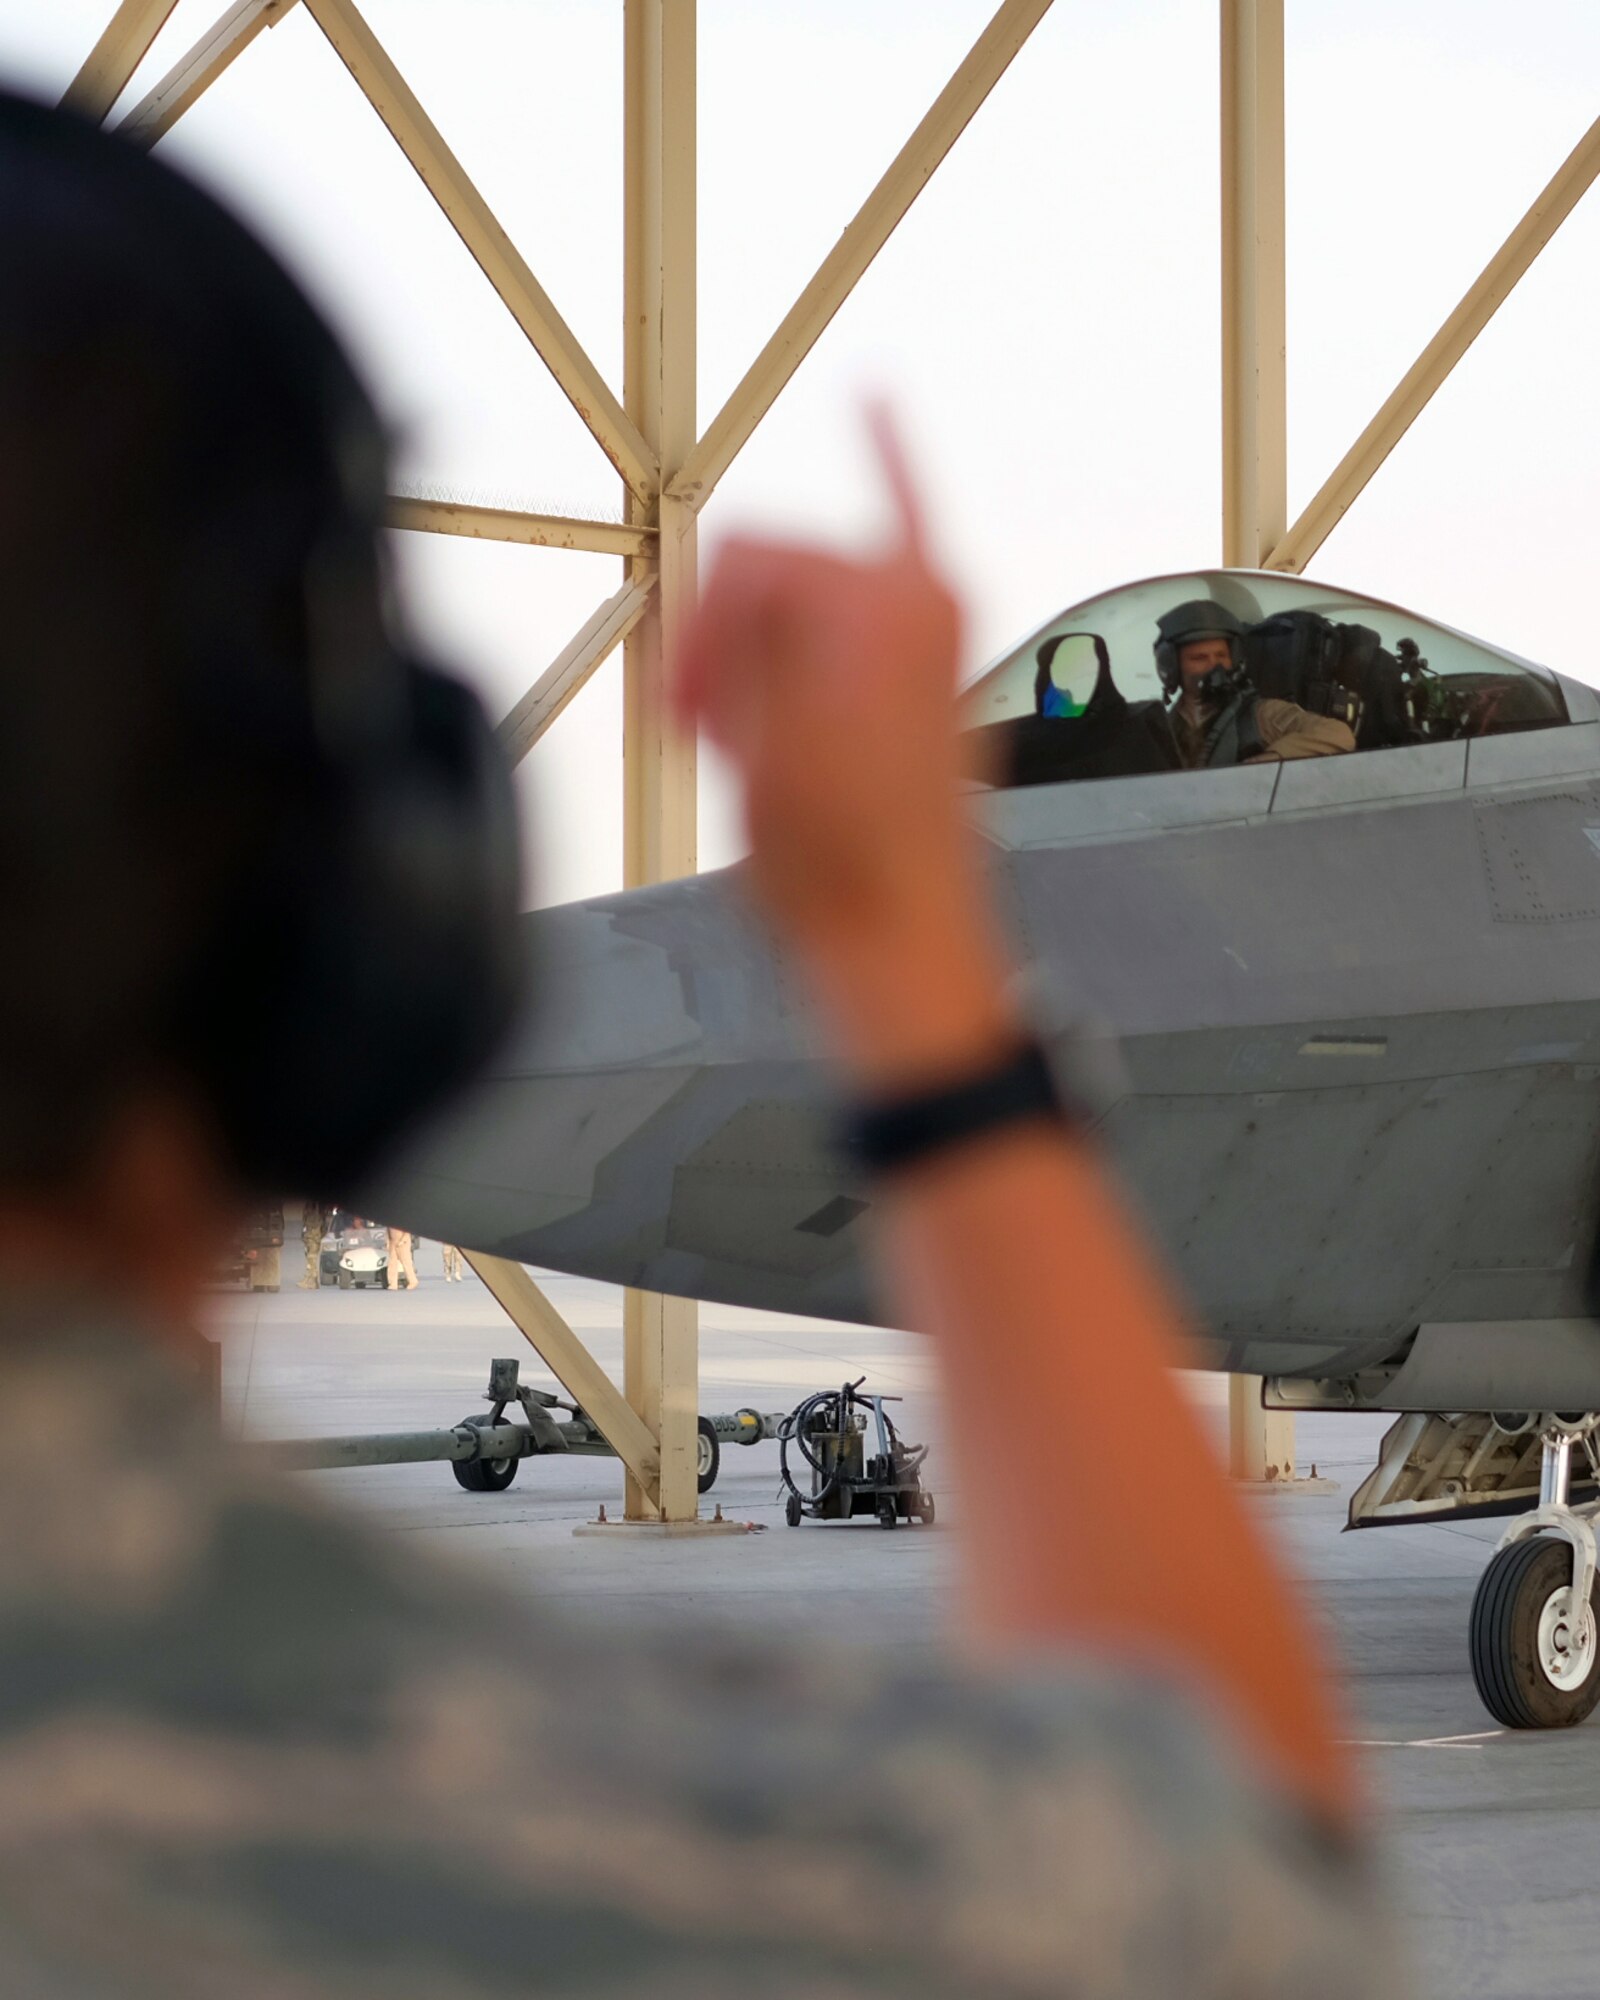 1st Lt. Erin, 380th Expeditionary Aircraft Maintenance Squadron Raptor Aircraft Maintenance Unit officer in-charge, signals to Brig. Gen. Charles S. Corcoran, 380th Air Expeditionary Wing commander, after his fini-flight June 30, 2017, at an undisclosed location in southwest Asia. Corcoran’s last flight with the 380 AEW follows an Air Force tradition dating back to World War II where upon completion of an aircrew member’s final flight they are doused with water and congratulated by their comrades in arms. (U.S. Air Force photo by Senior Airman Preston Webb)